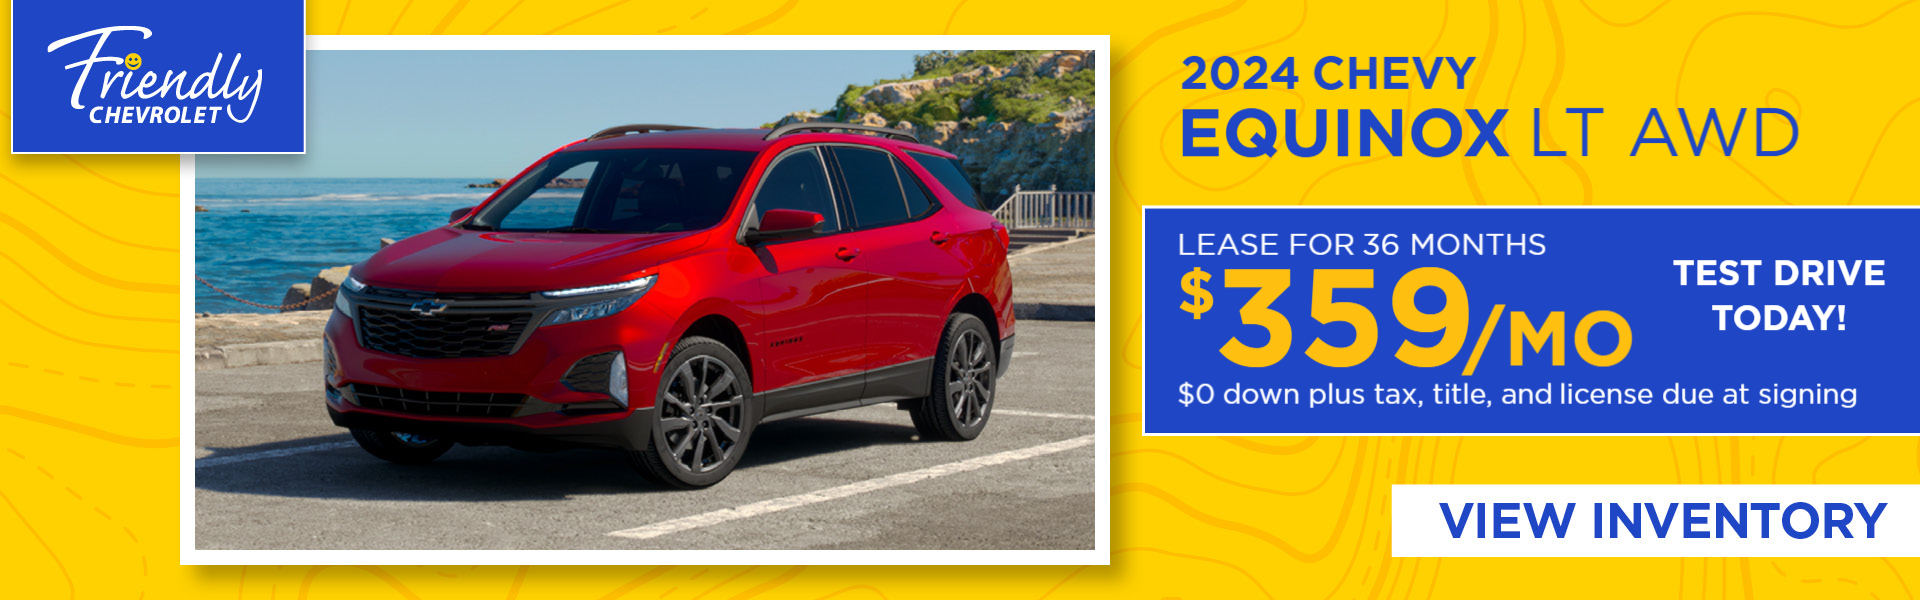 Lease a New Chevy Equinox for $359 per month